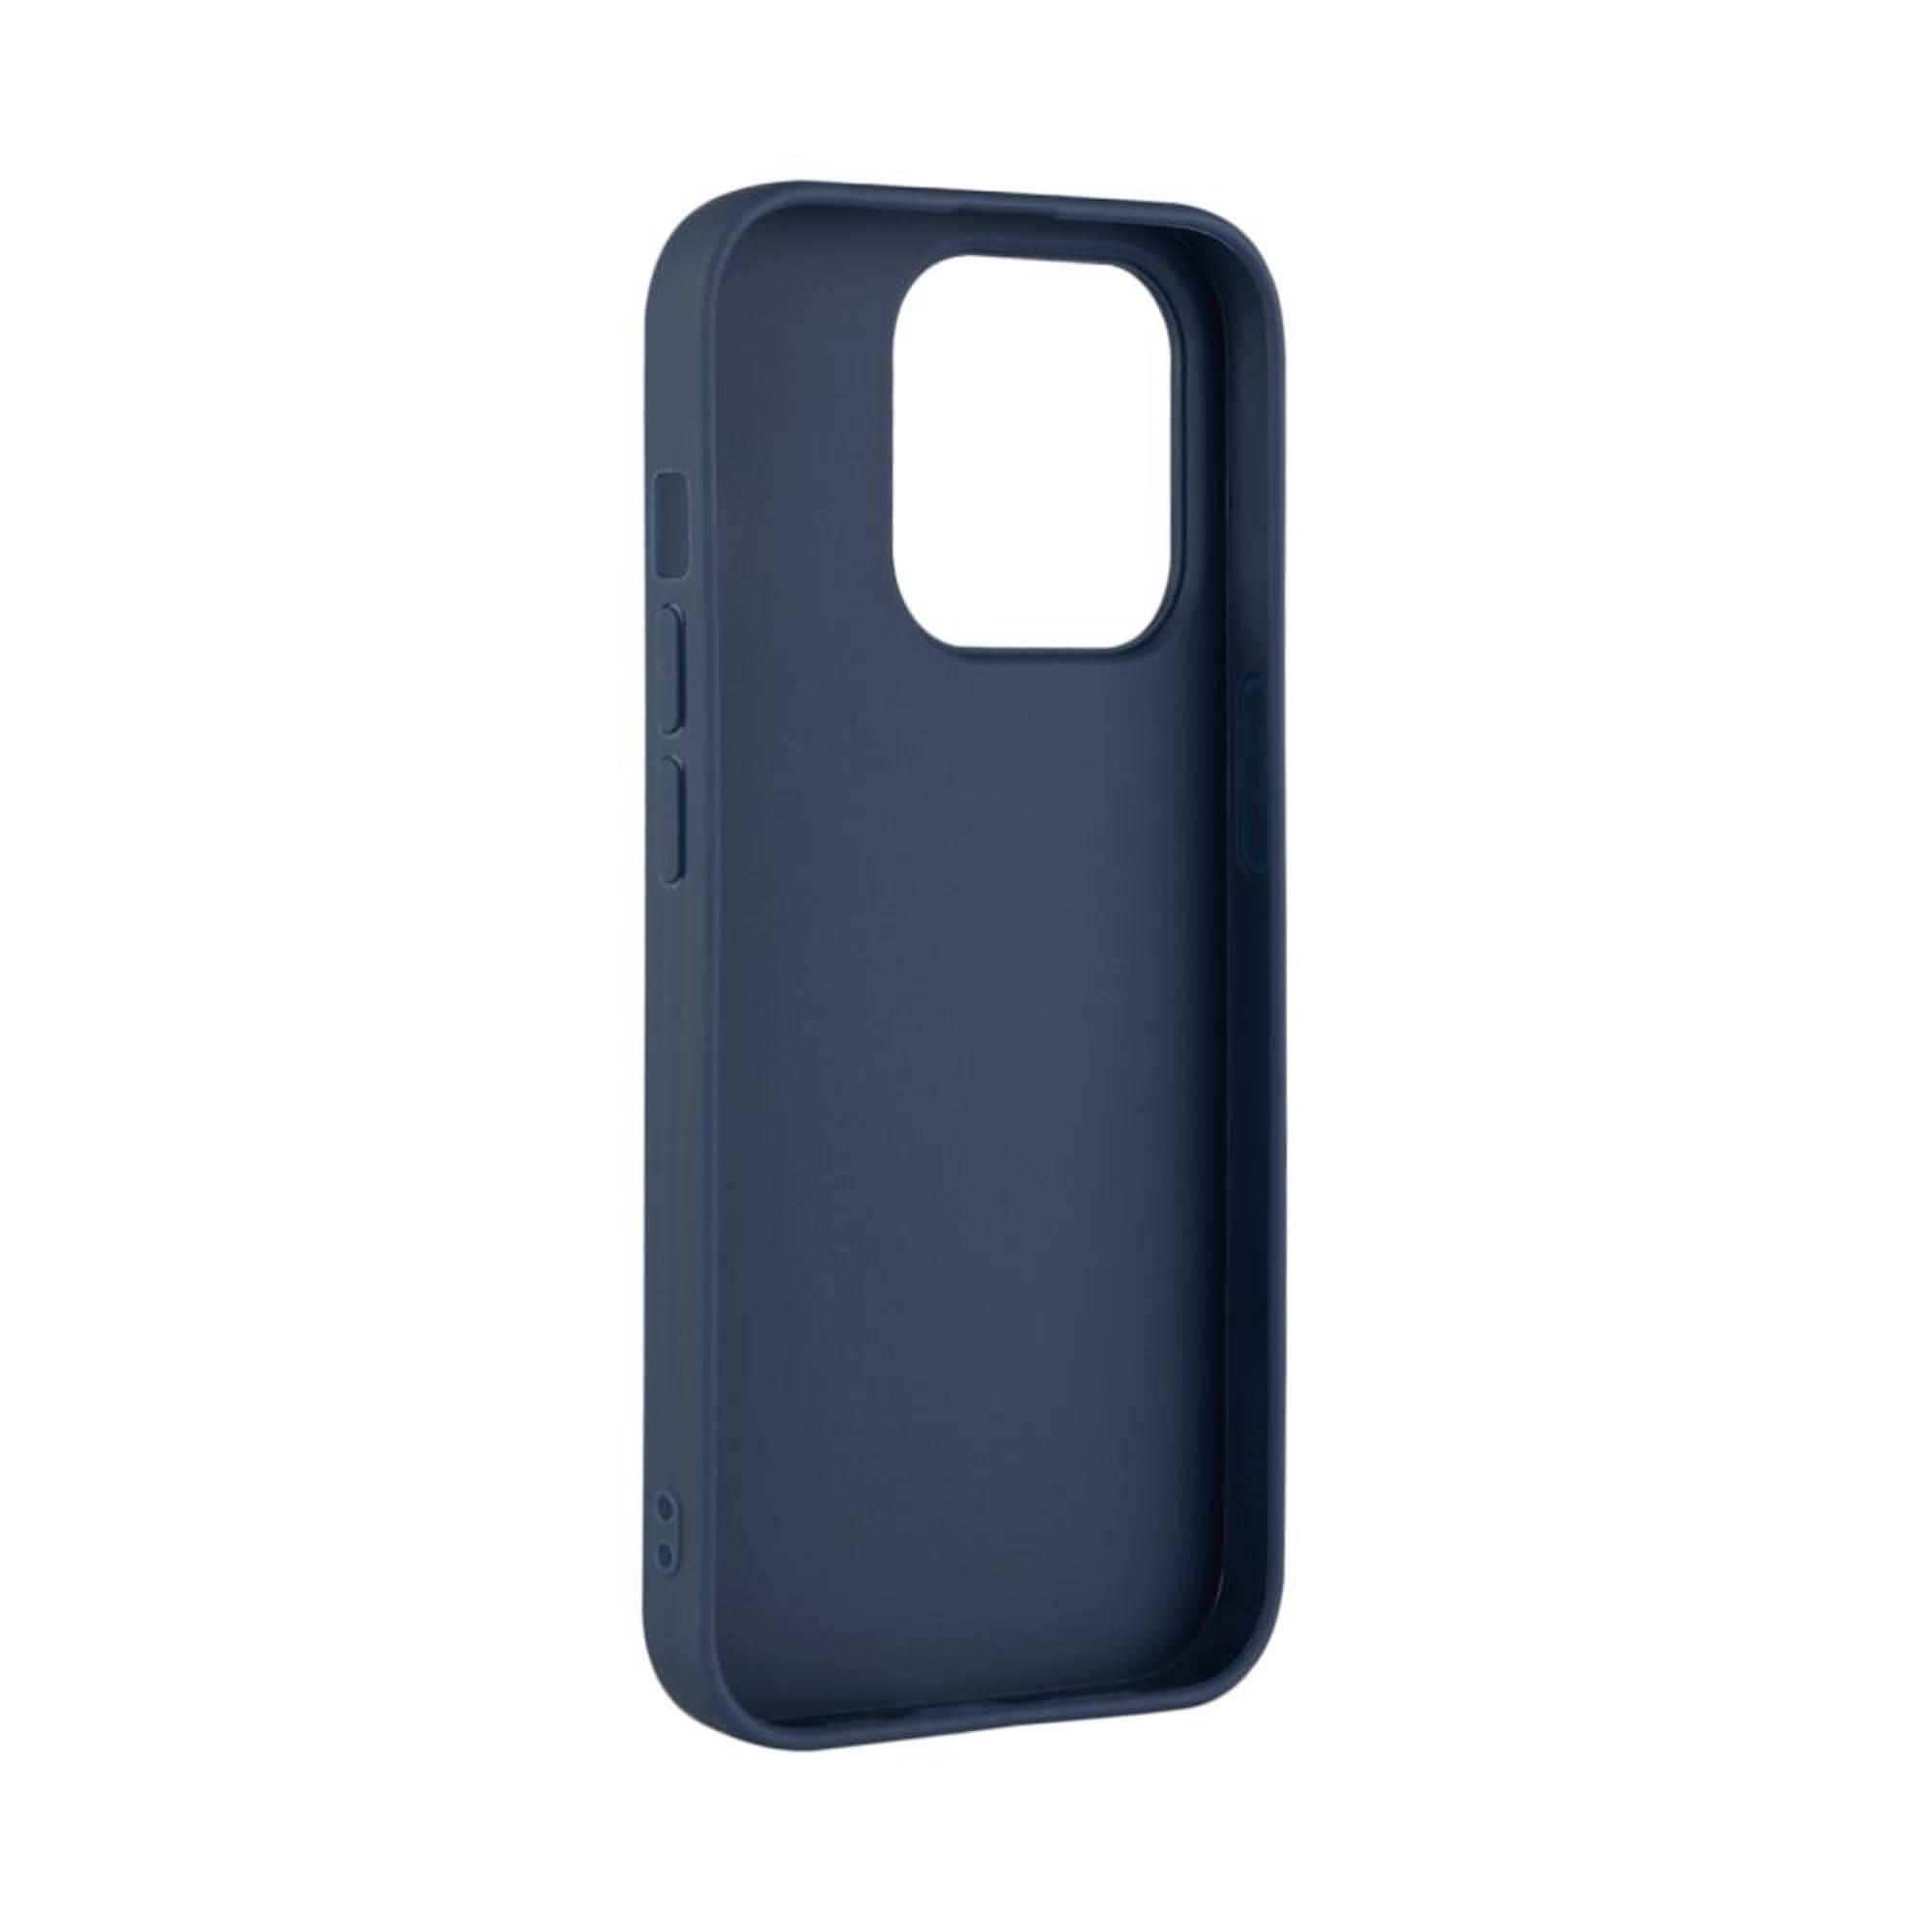 FIXED 14 Blau iPhone Backcover, Apple, FIXST-930-BL, Pro,